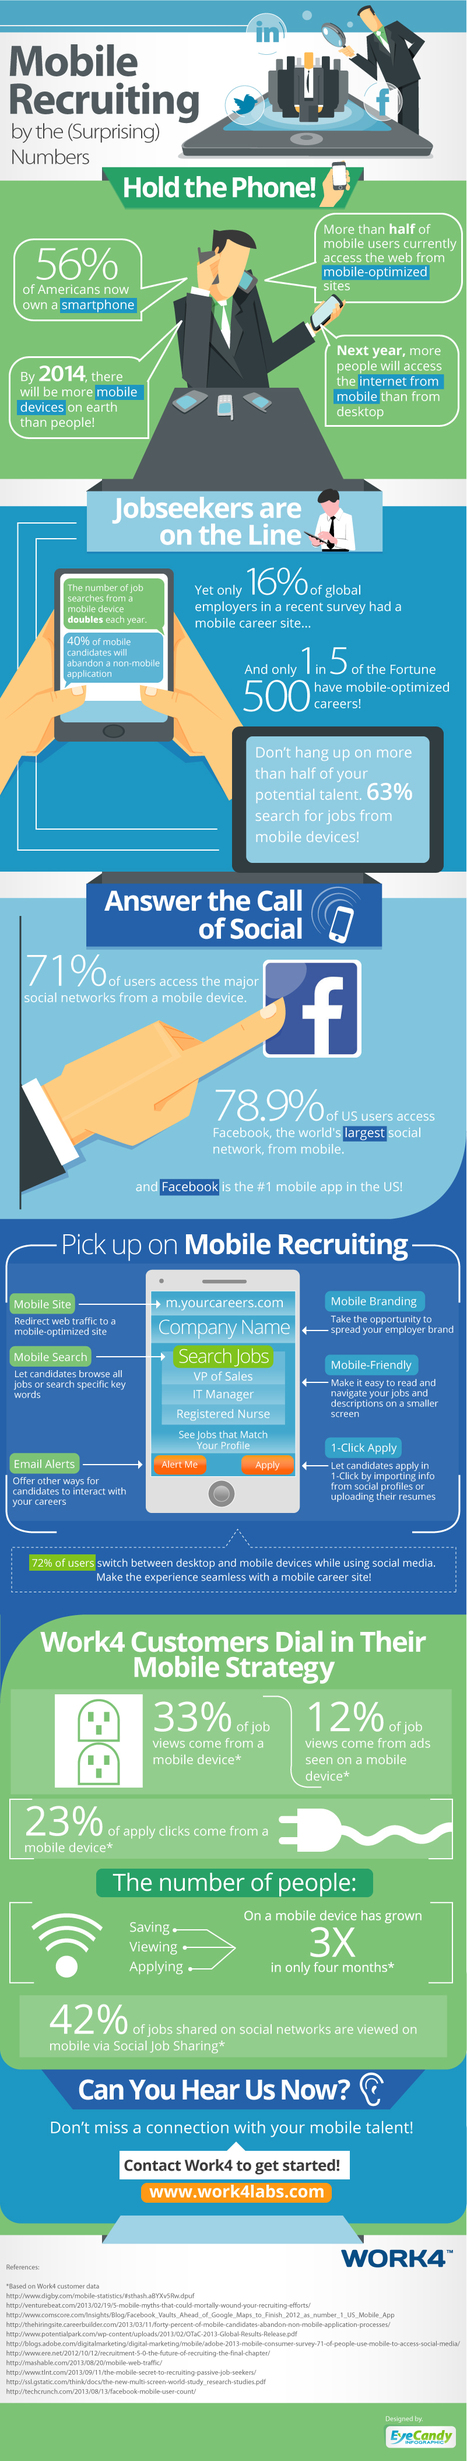 Social Employment Recruiting Goes Mobile | Teaching Business Communication and Employment | Scoop.it